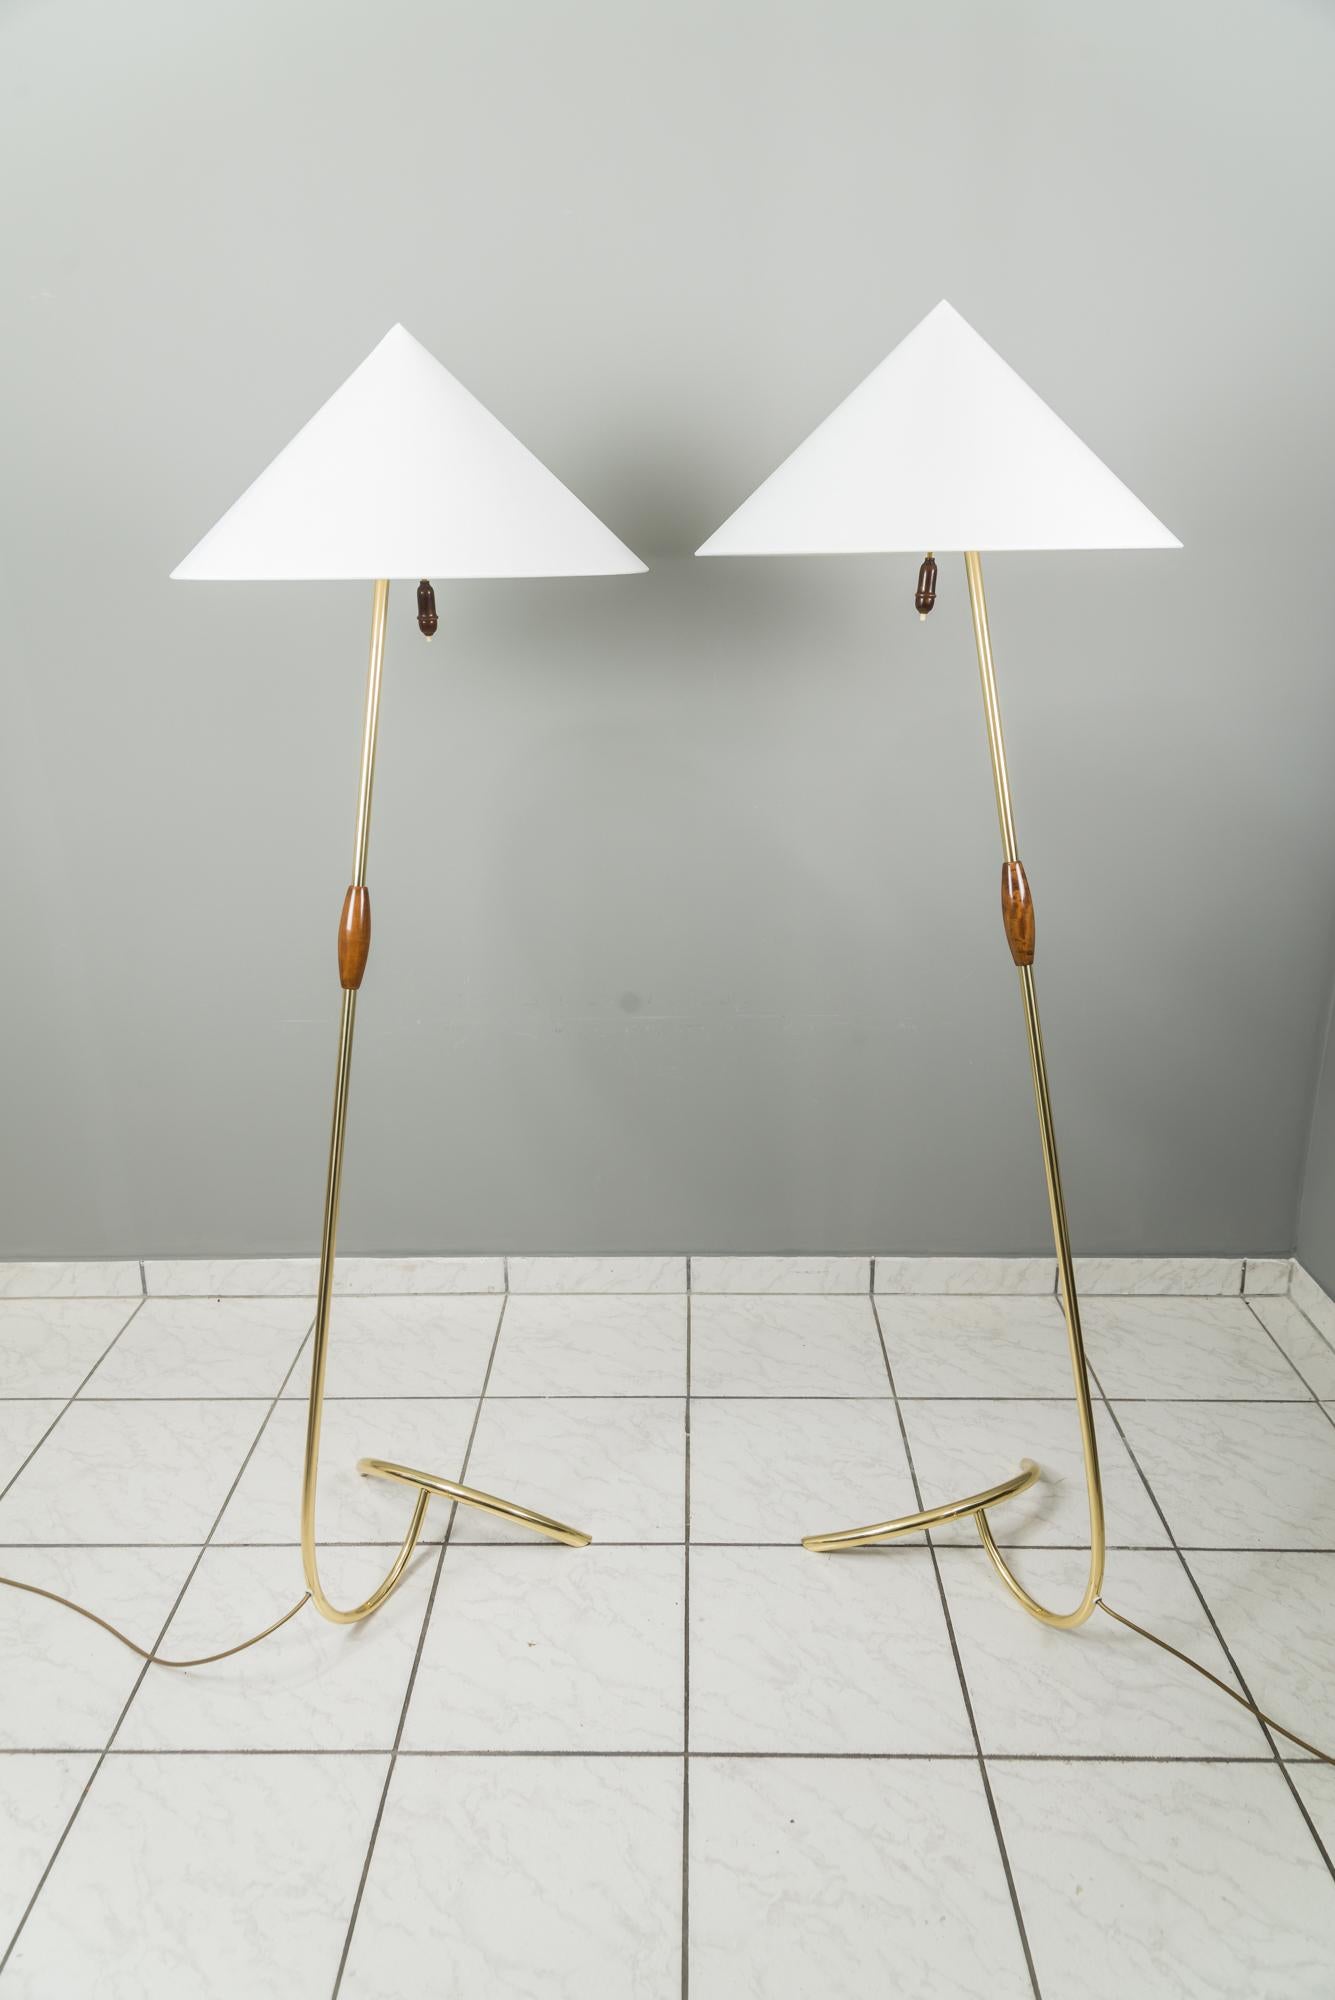 Two Rupert Nikoll Floor Lamps, circa 1950s For Sale 10